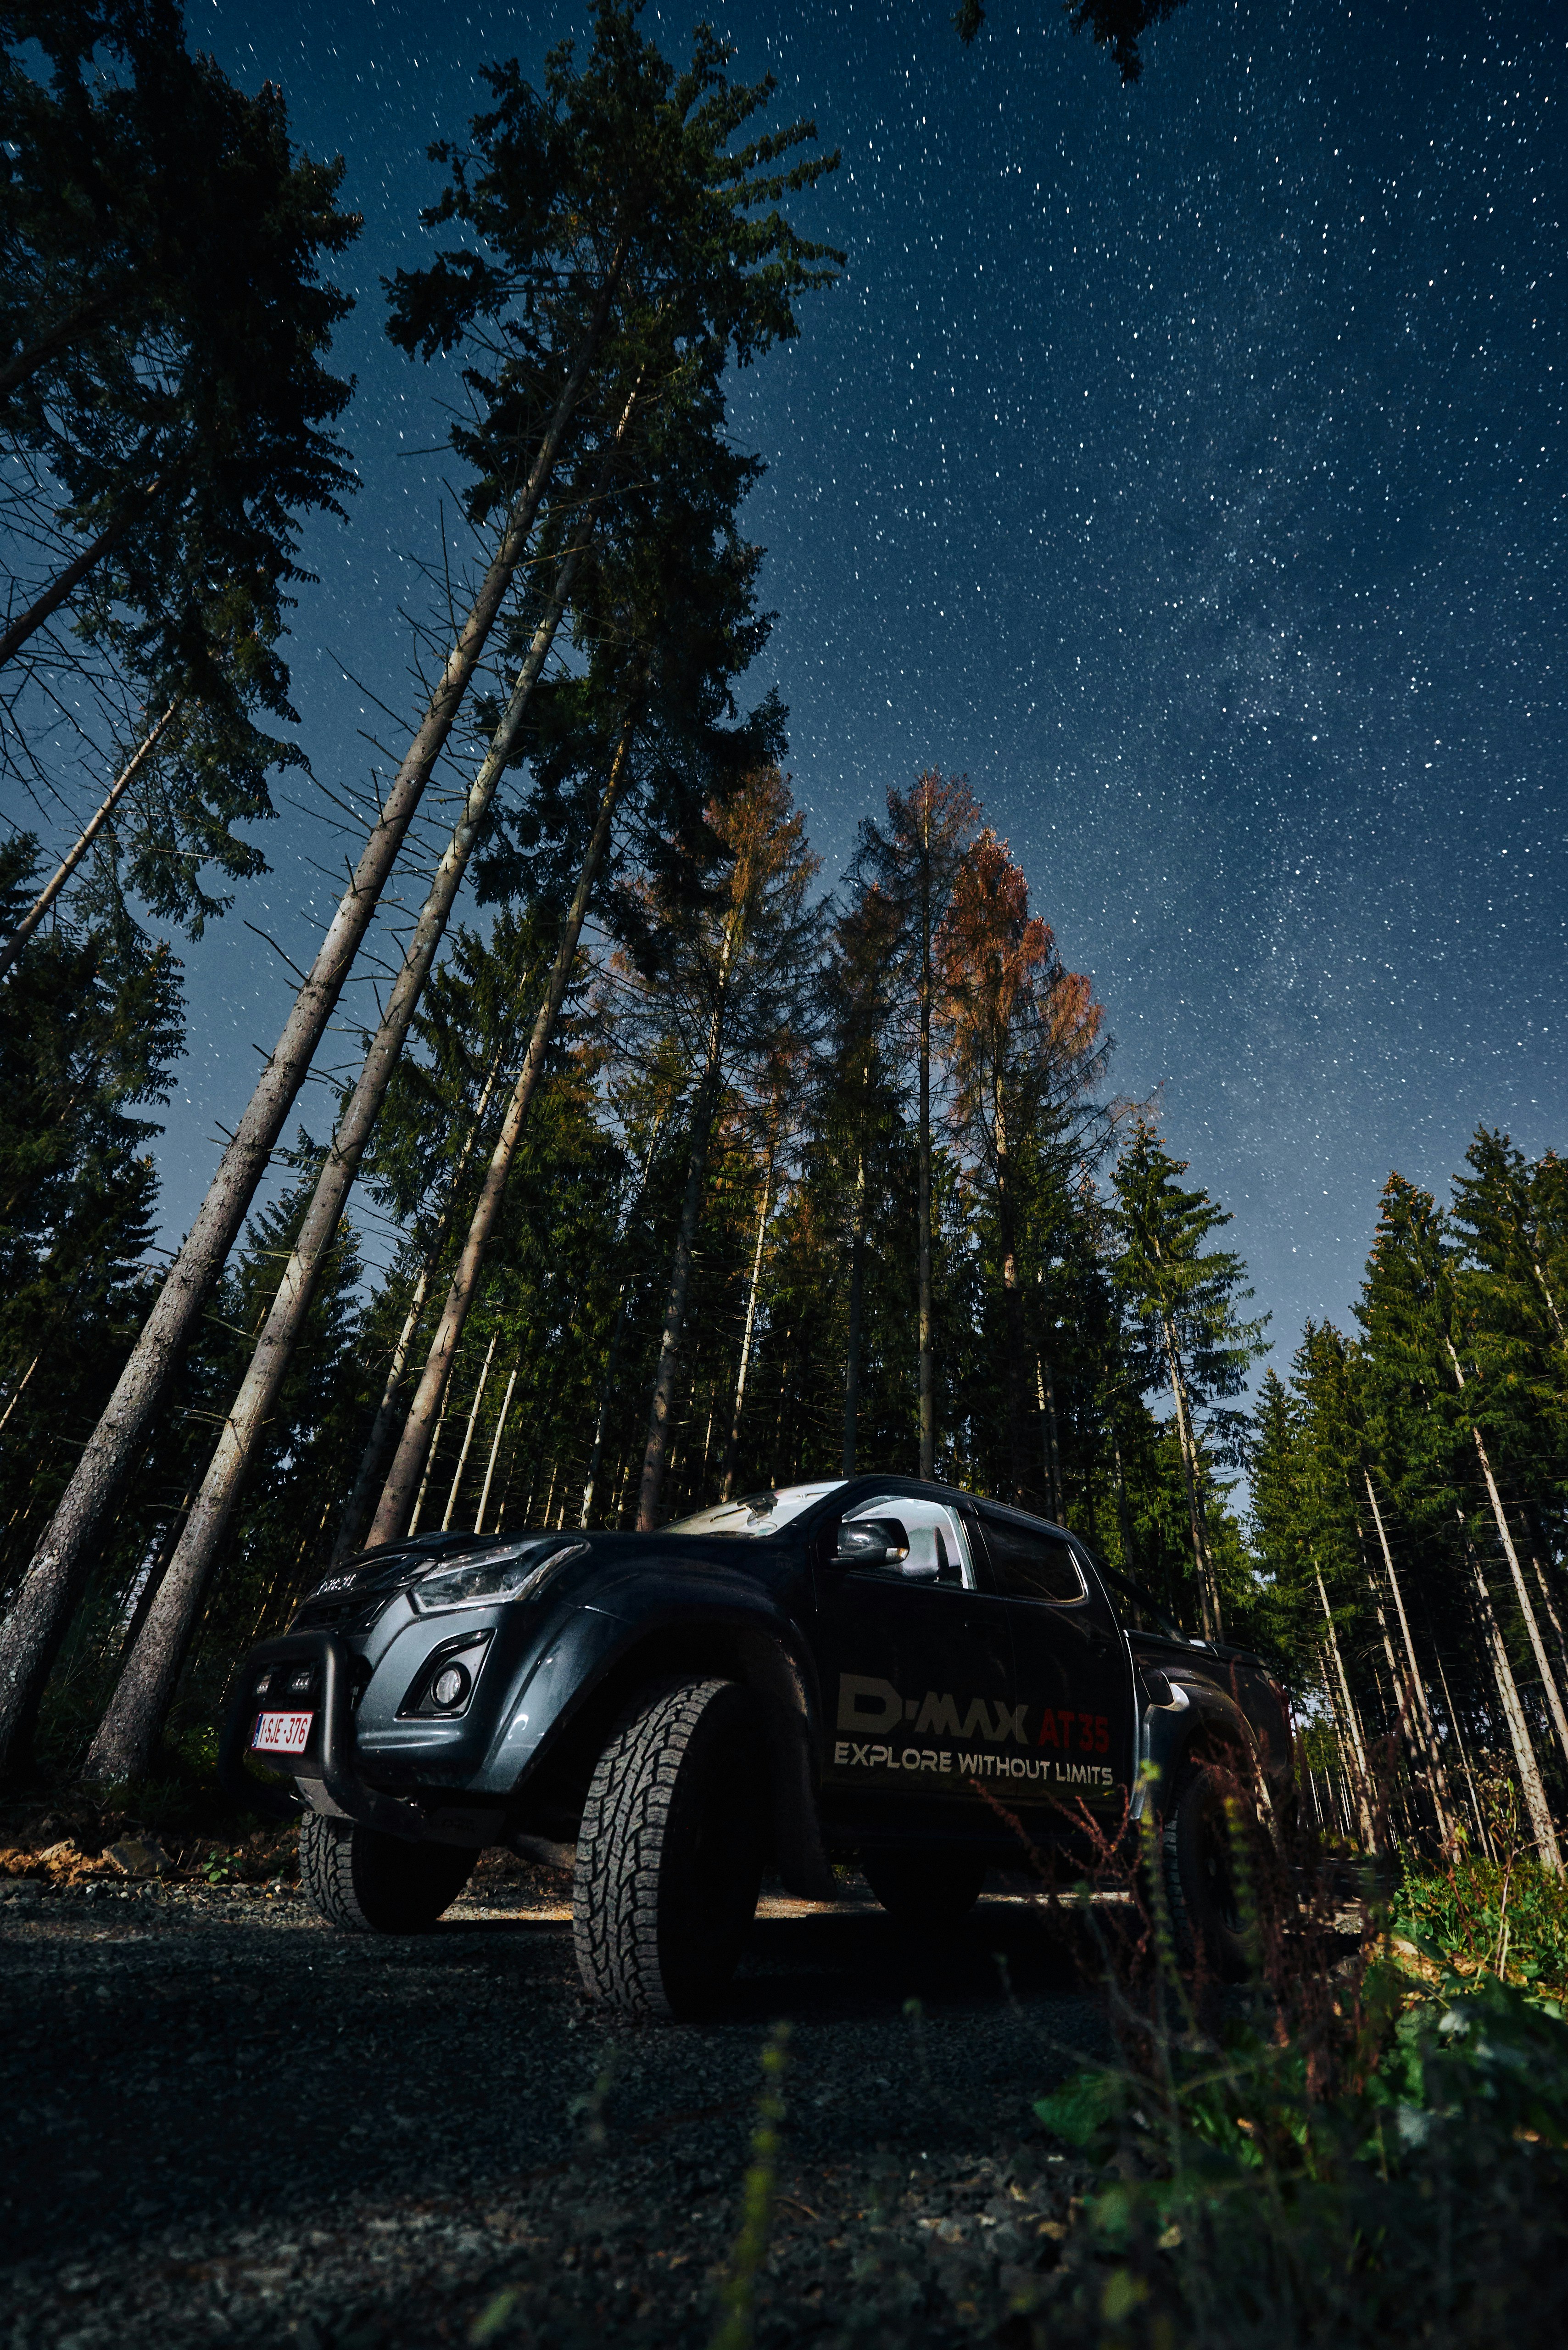 black Isuzu D-Max parked near forest trees during night time